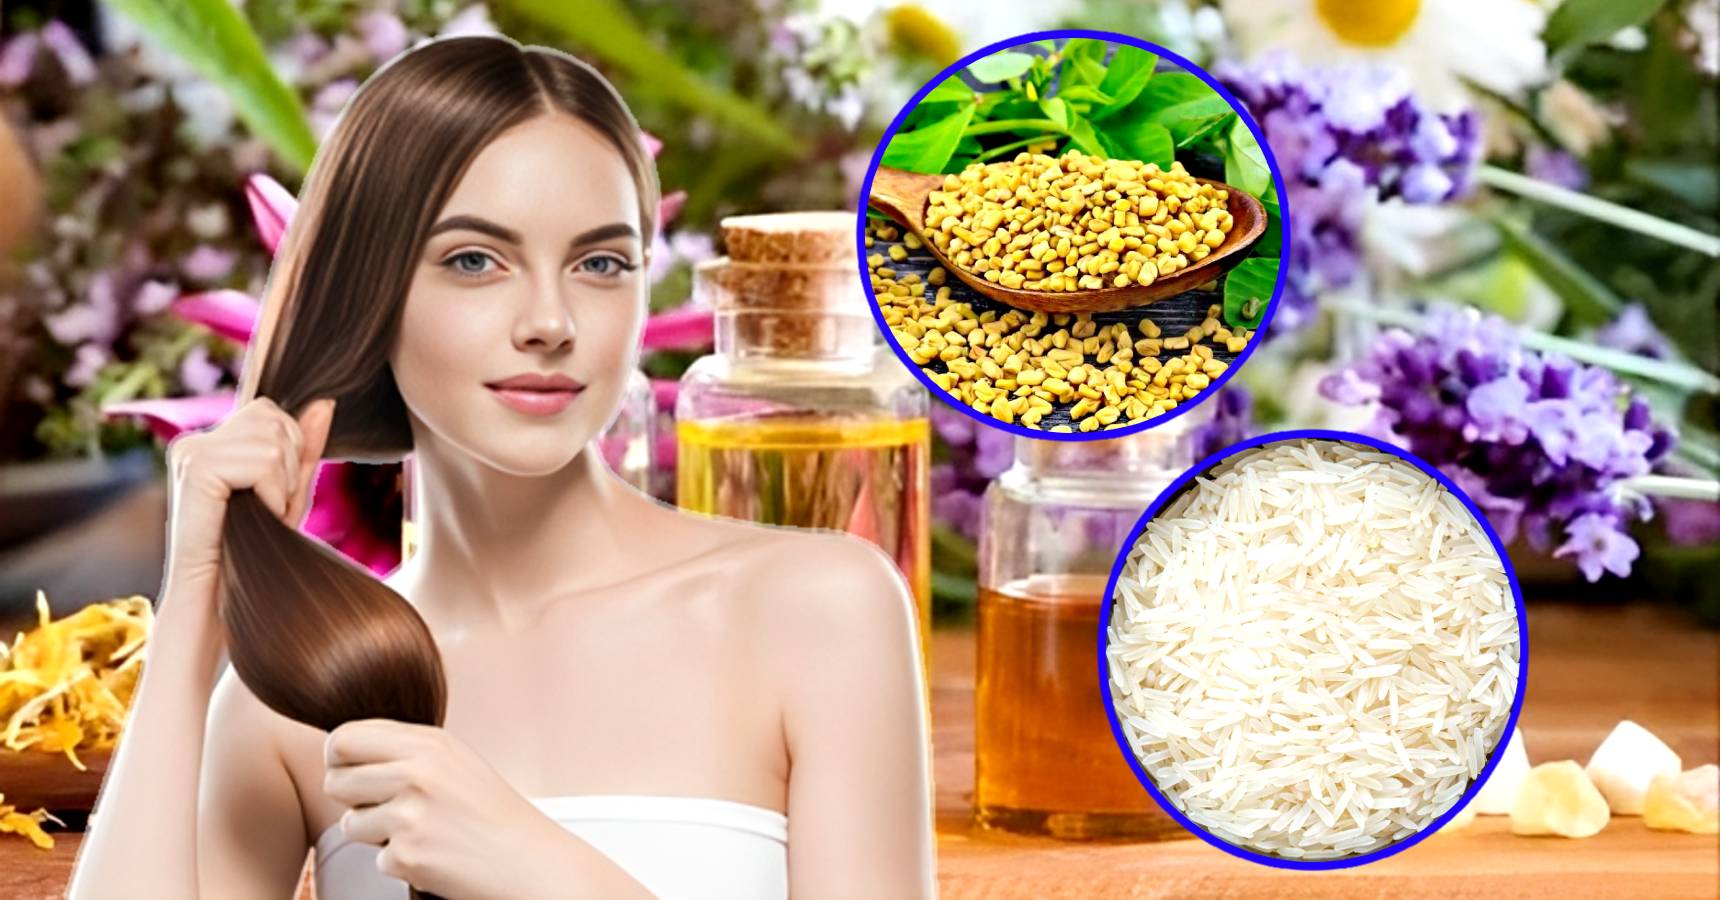 Monsoon hair care tips use this homemade hair spray made with Rice and Methi